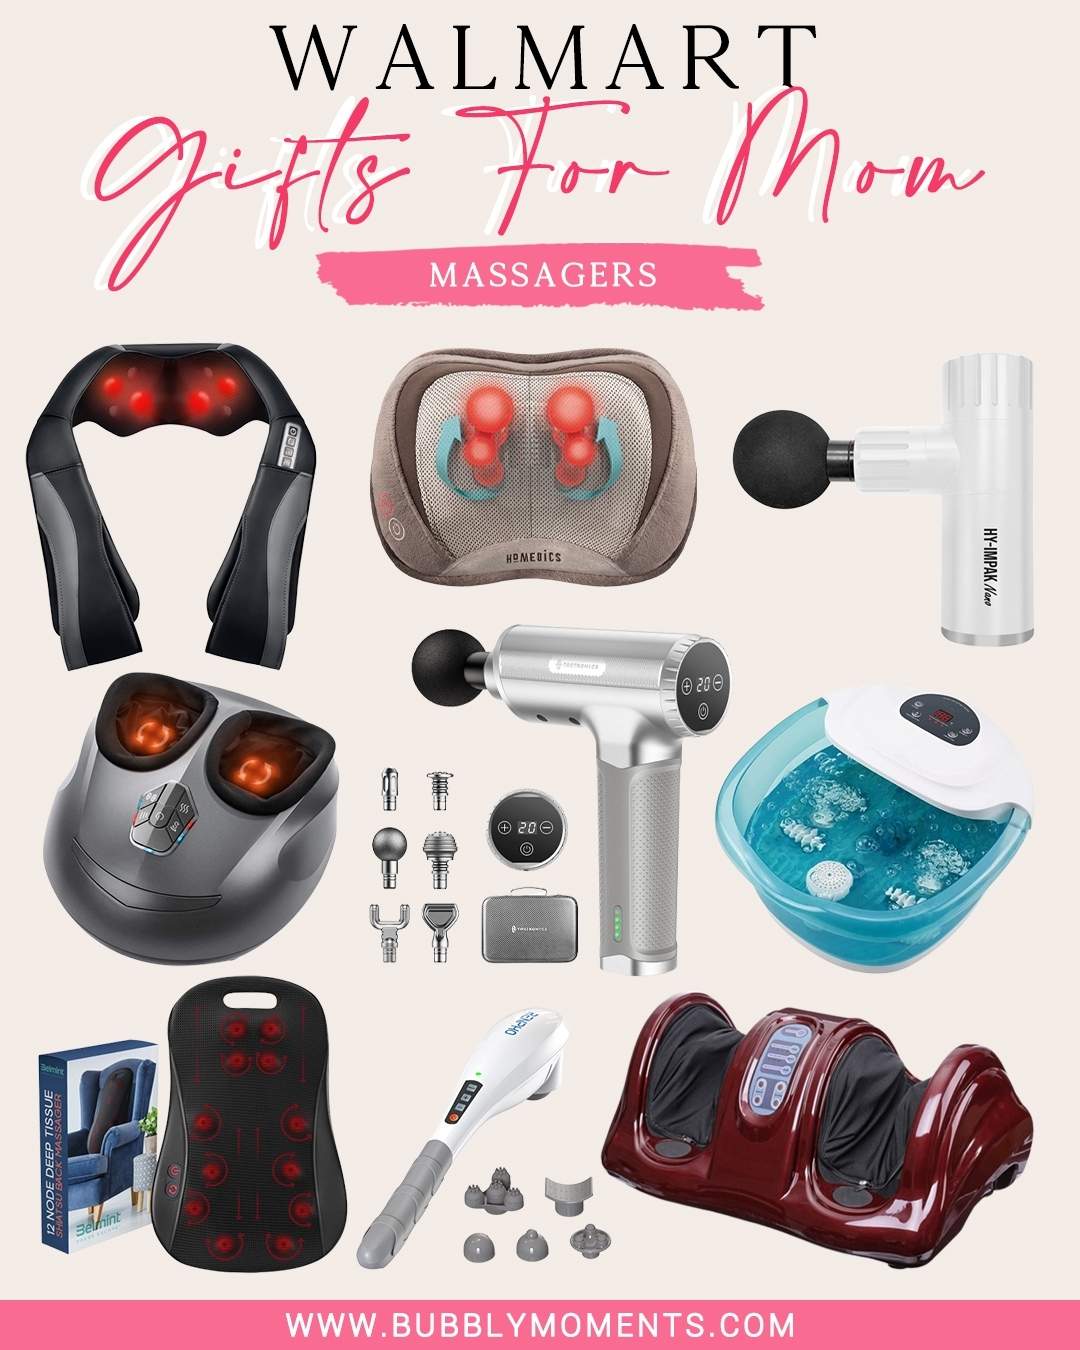 Mother's Day Gift Ideas for the Tech-Savvy Mom